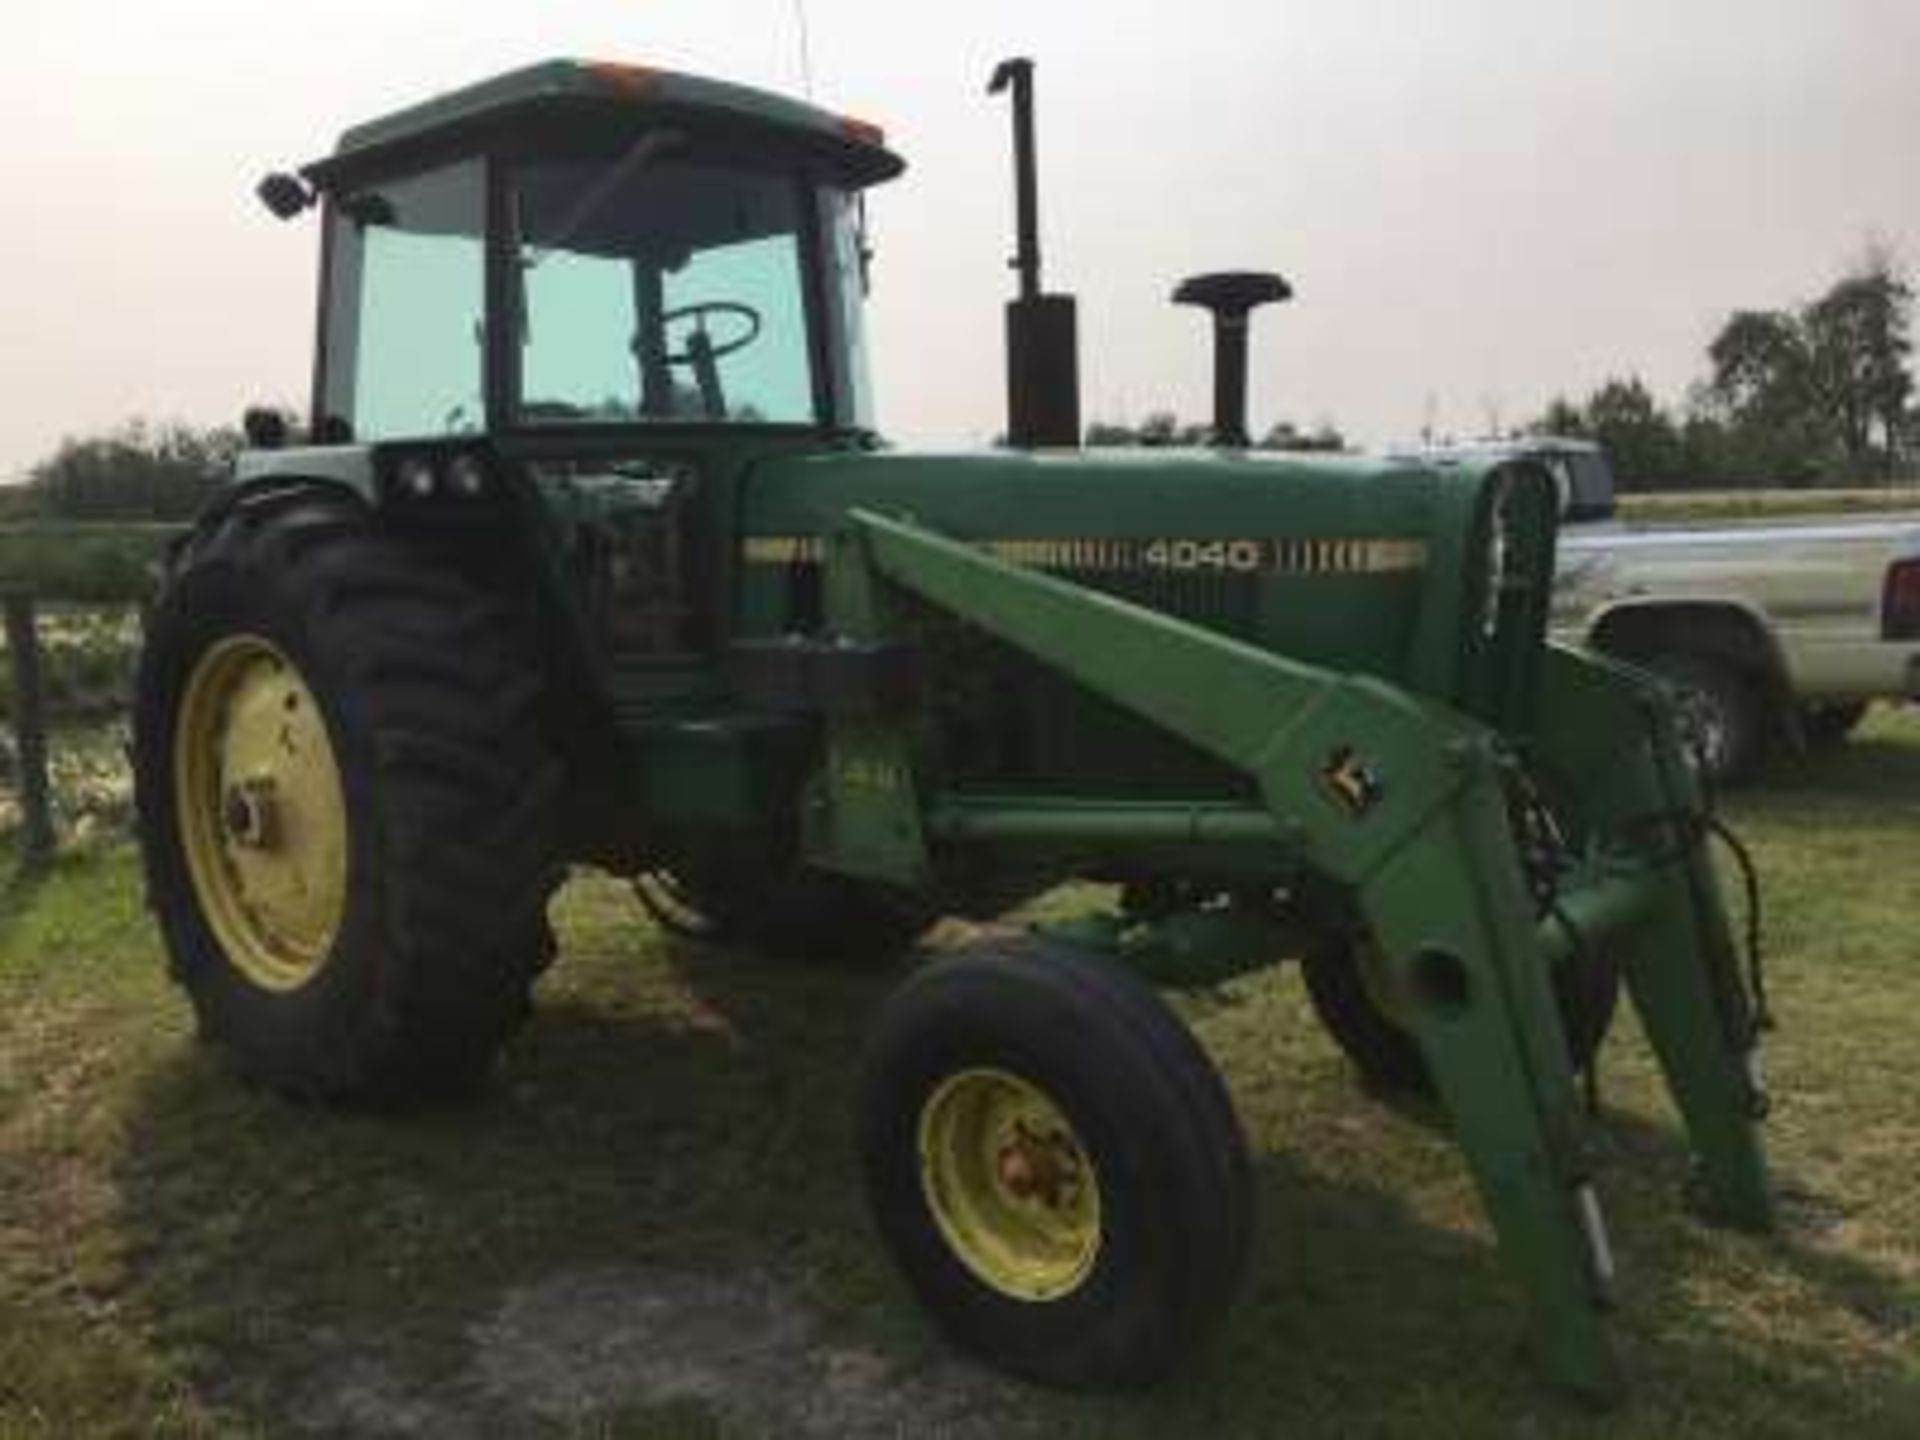 JD 4040 tractor, 5600hrs, 3pth, 3 hyds w/JD 148 FEL & Grapple, tires like new